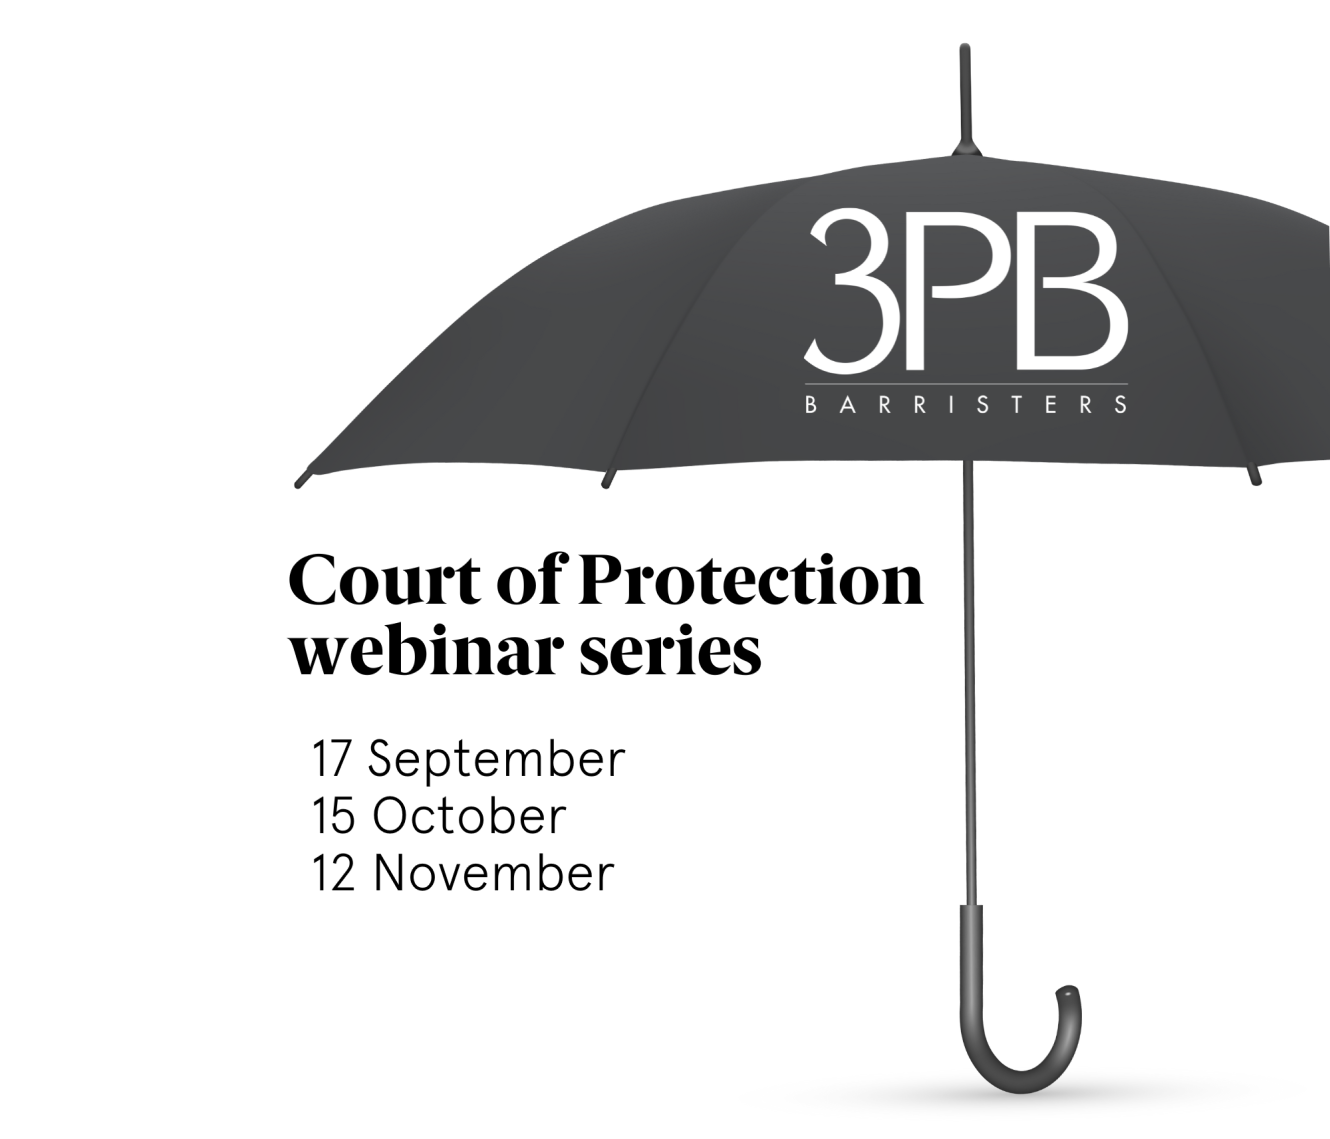 Court of protection webinar series